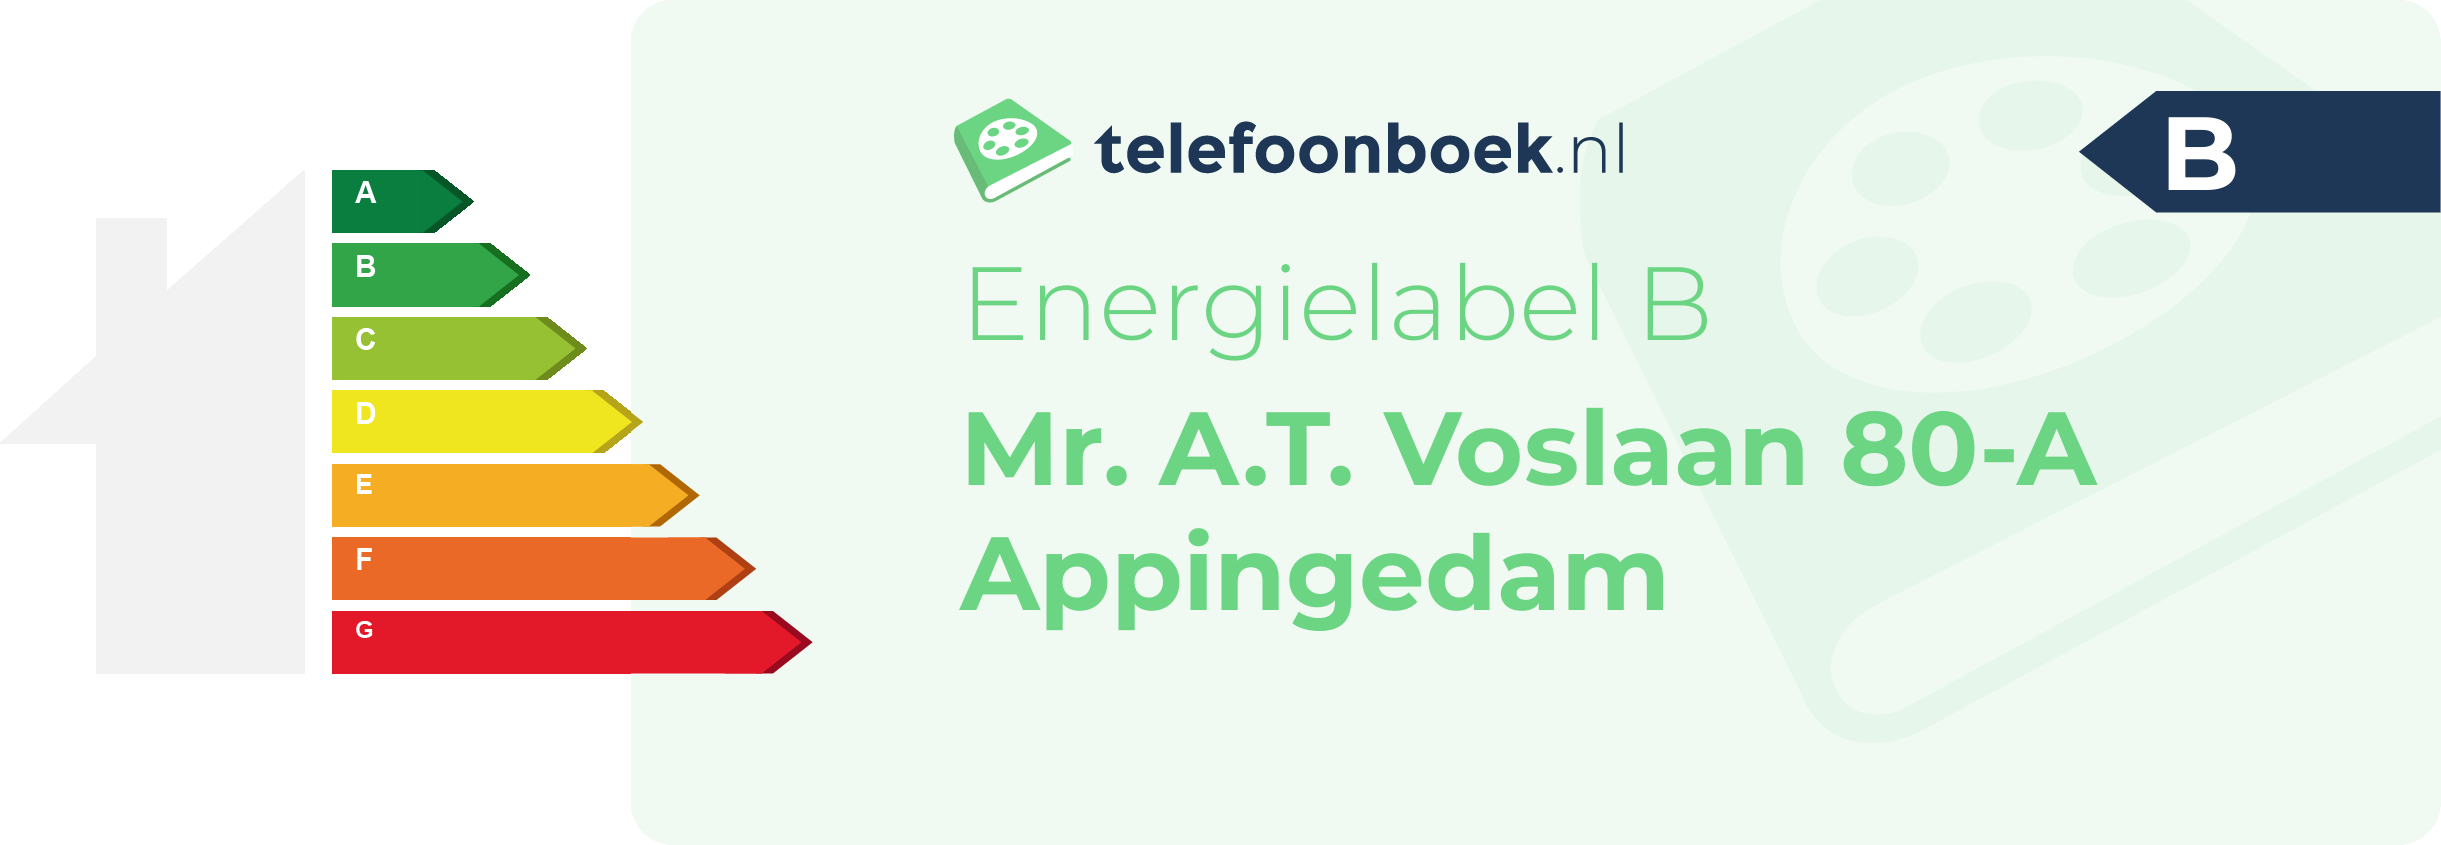 Energielabel Mr. A.T. Voslaan 80-A Appingedam